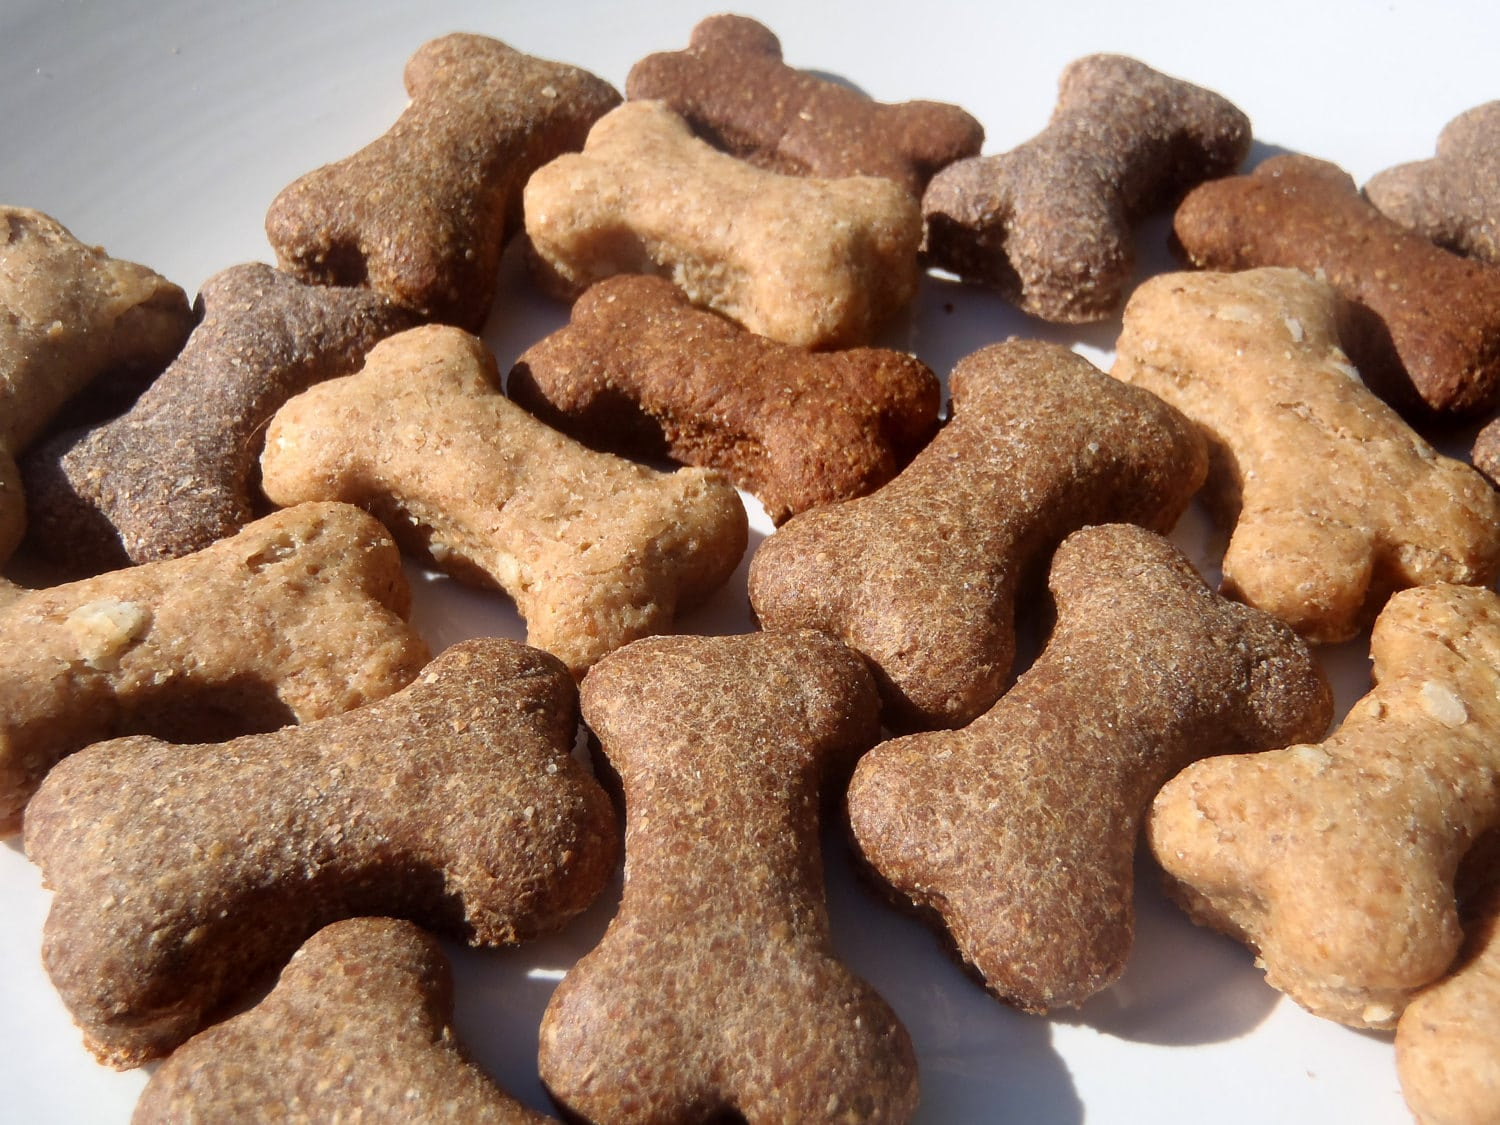 Organic Dog Treats 2018 Top 5 Best Sellers Welcome To The Puppyurl 